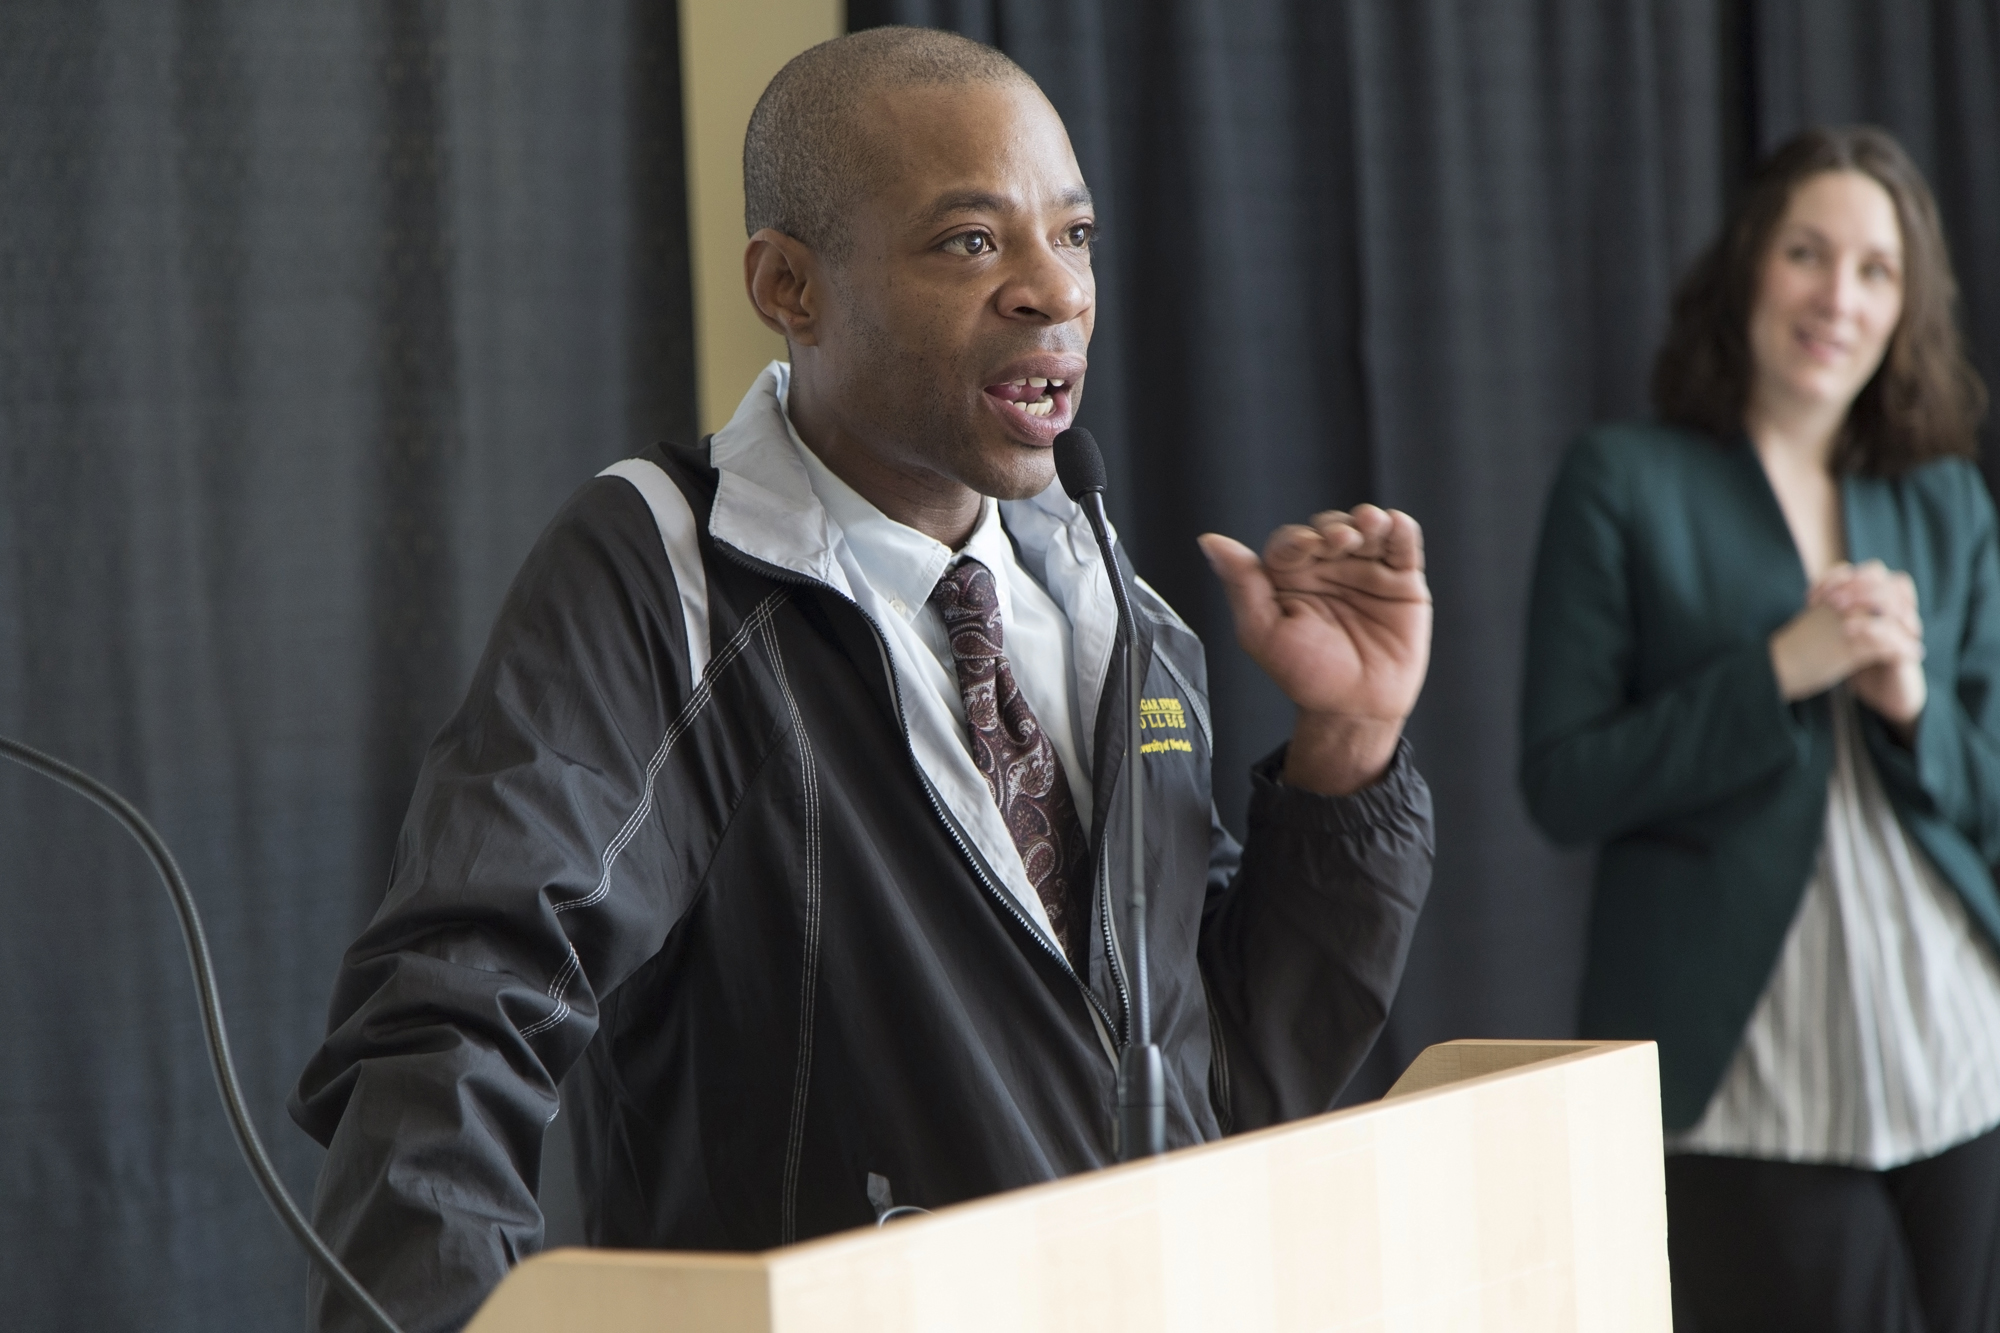 Derrick Griffith, seen in this undated photo, served as the acting dean of student affairs and enrollment management at Medgar Evers College.